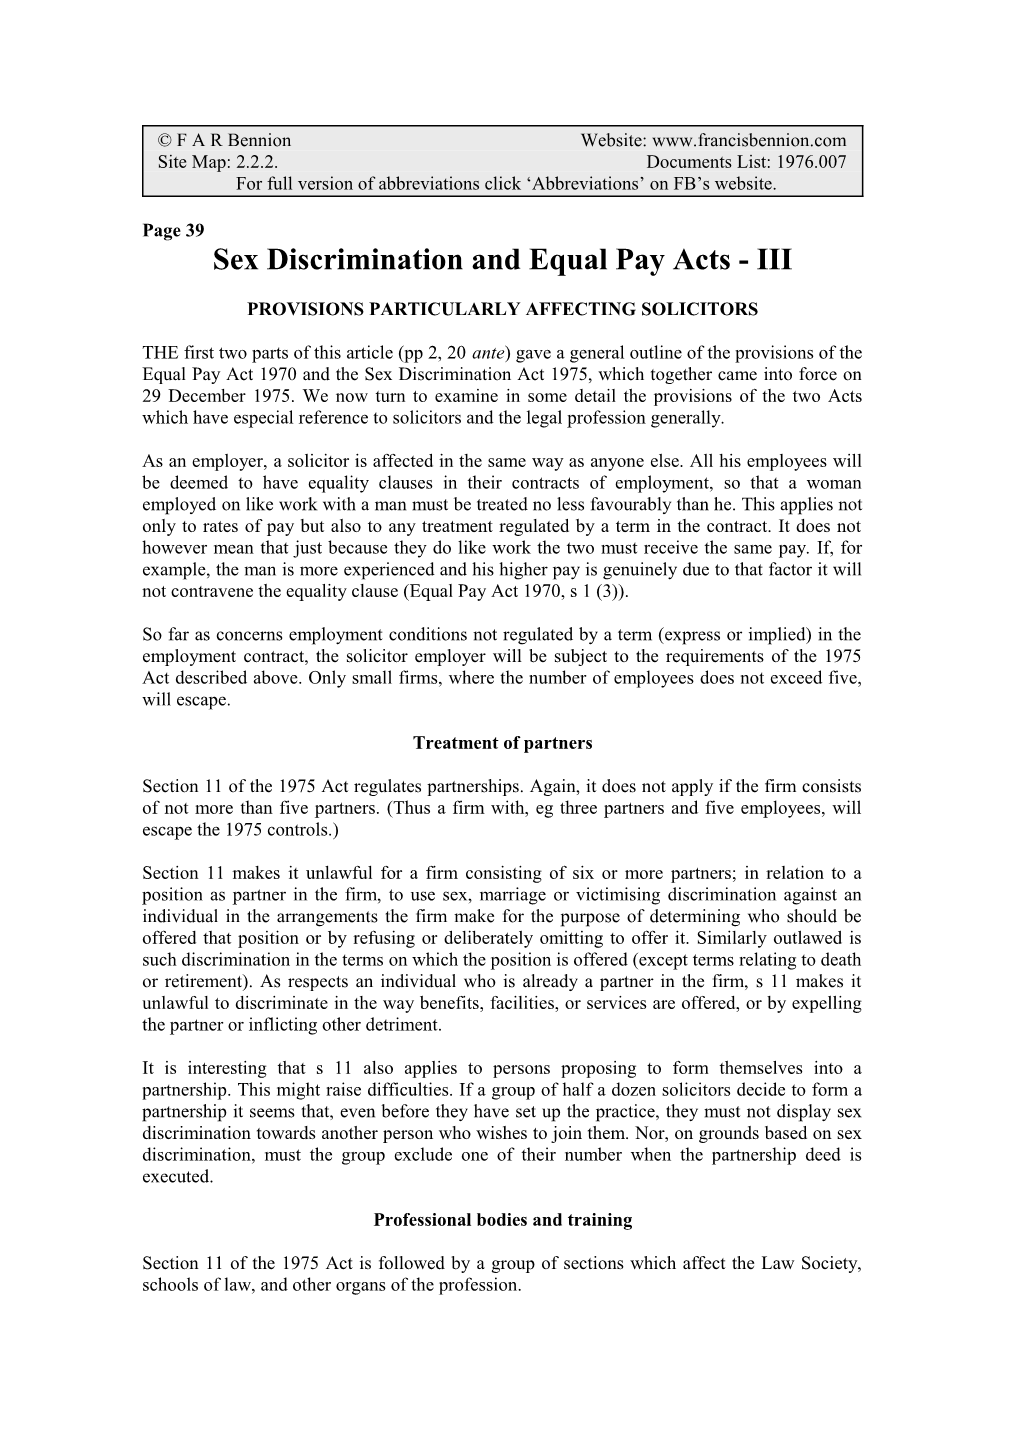 Sex Discrimination and Equal Pay Acts-1